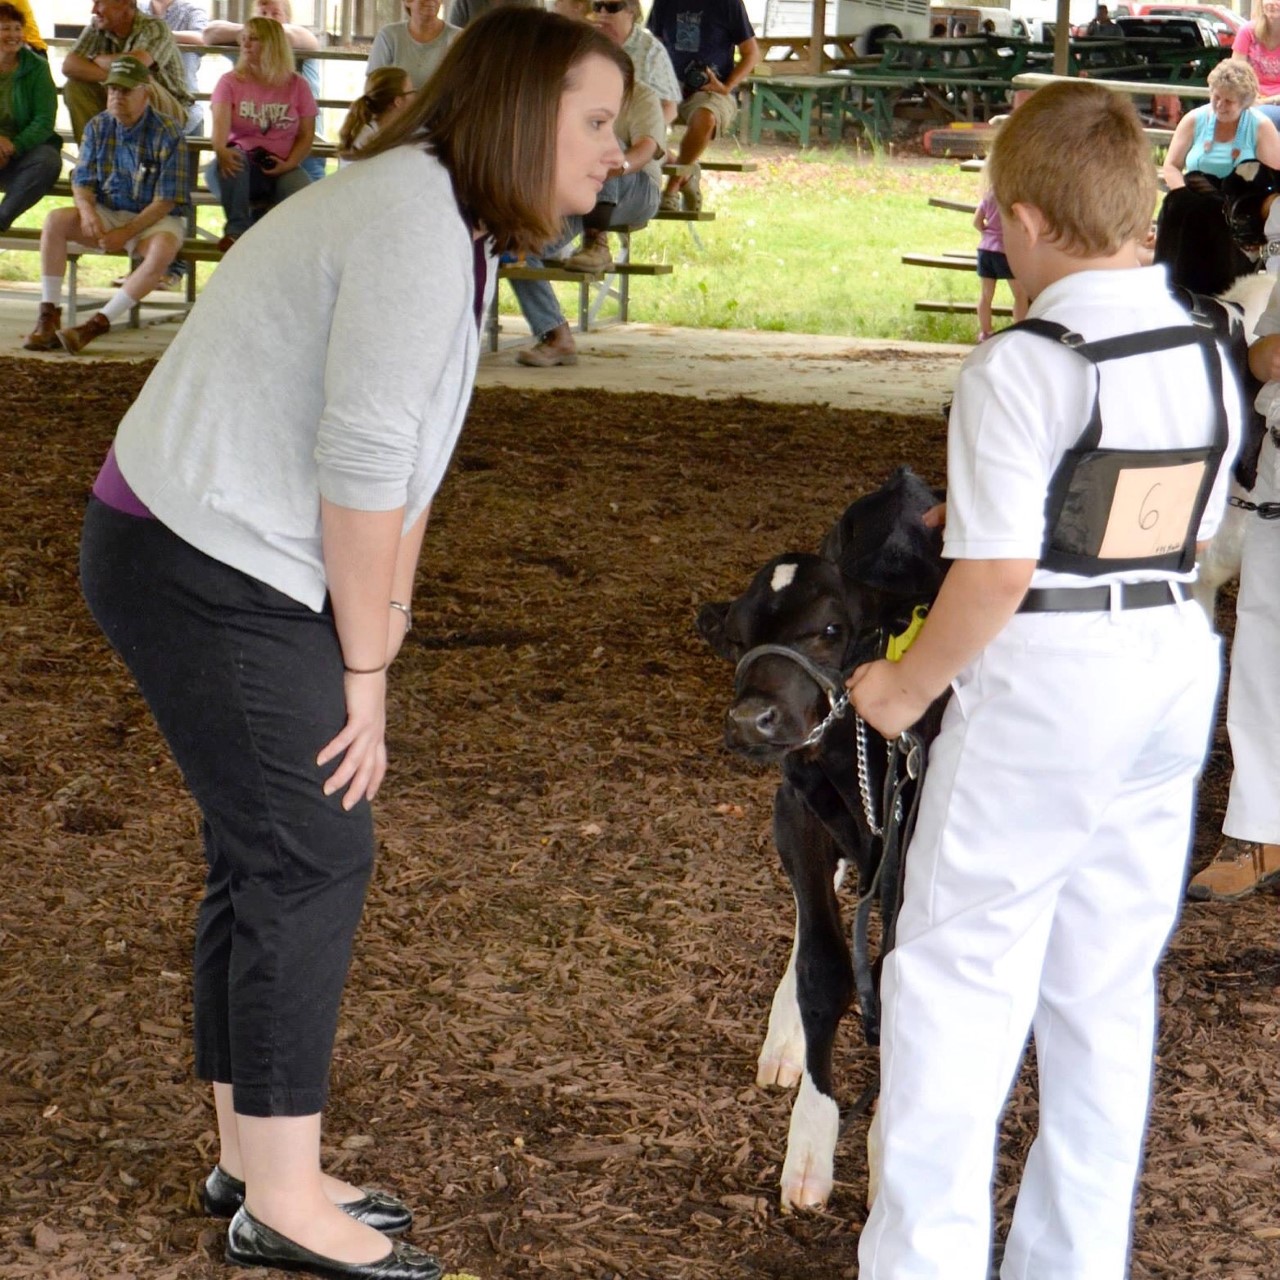 Judges at livestock shows ask participants questions about their animals.